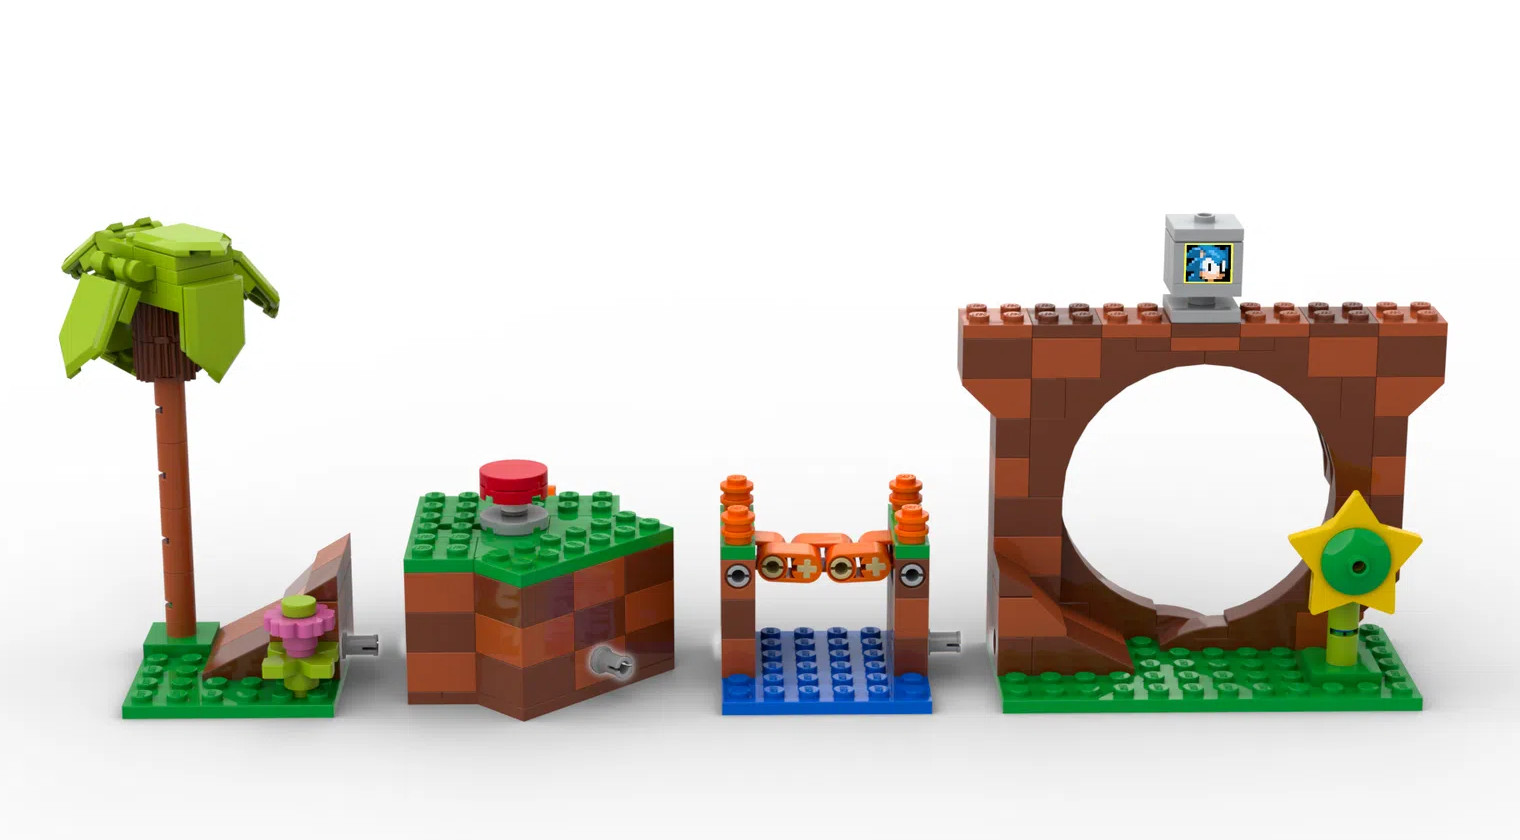 Sonic The Hedgehog can actually spin in Lego's new sets - The Verge